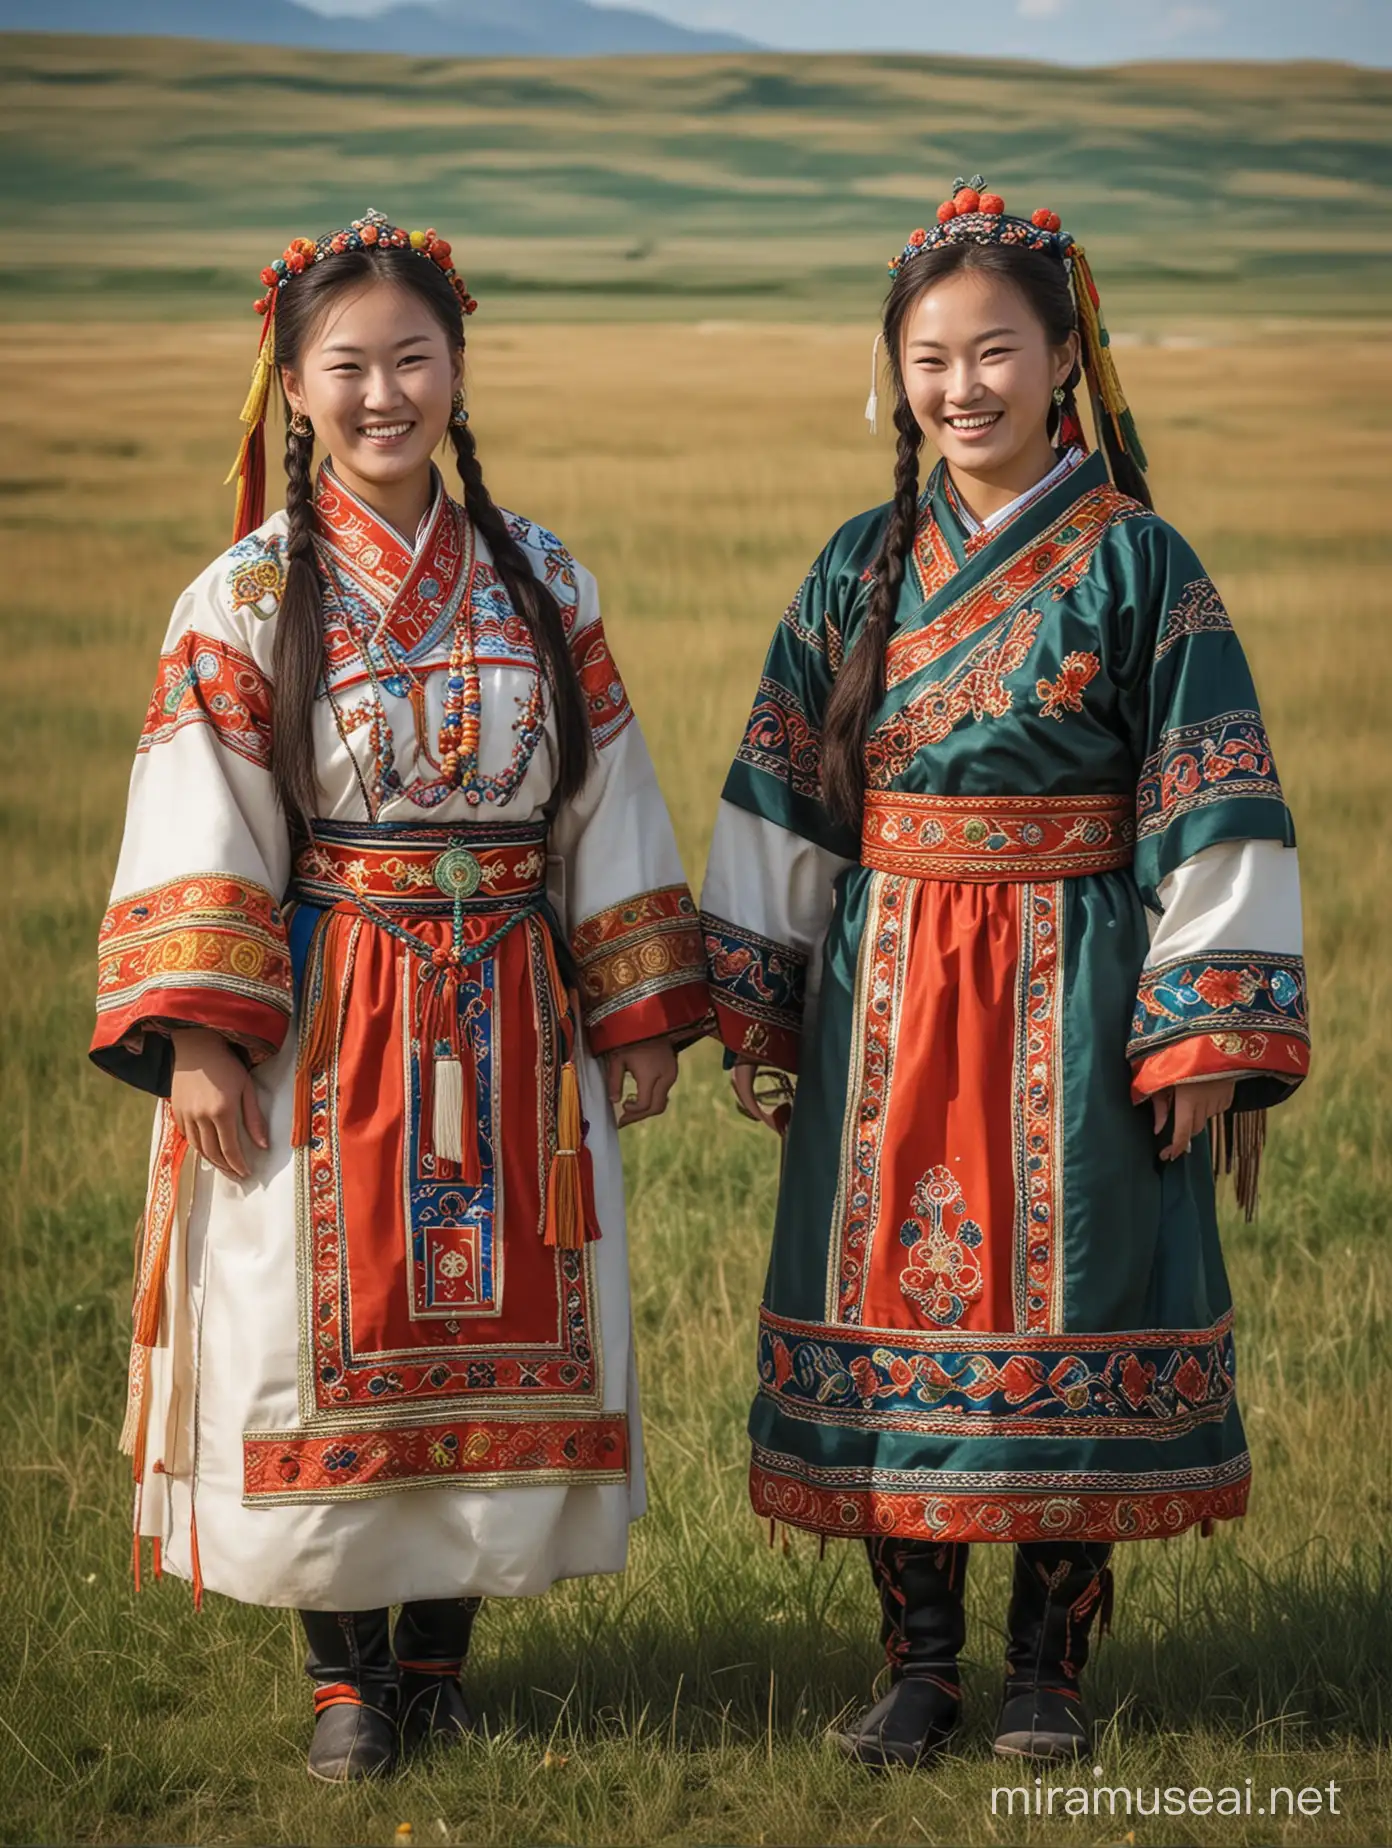 Mongolian Sisters in Turgot Costumes Smiling on Grassland